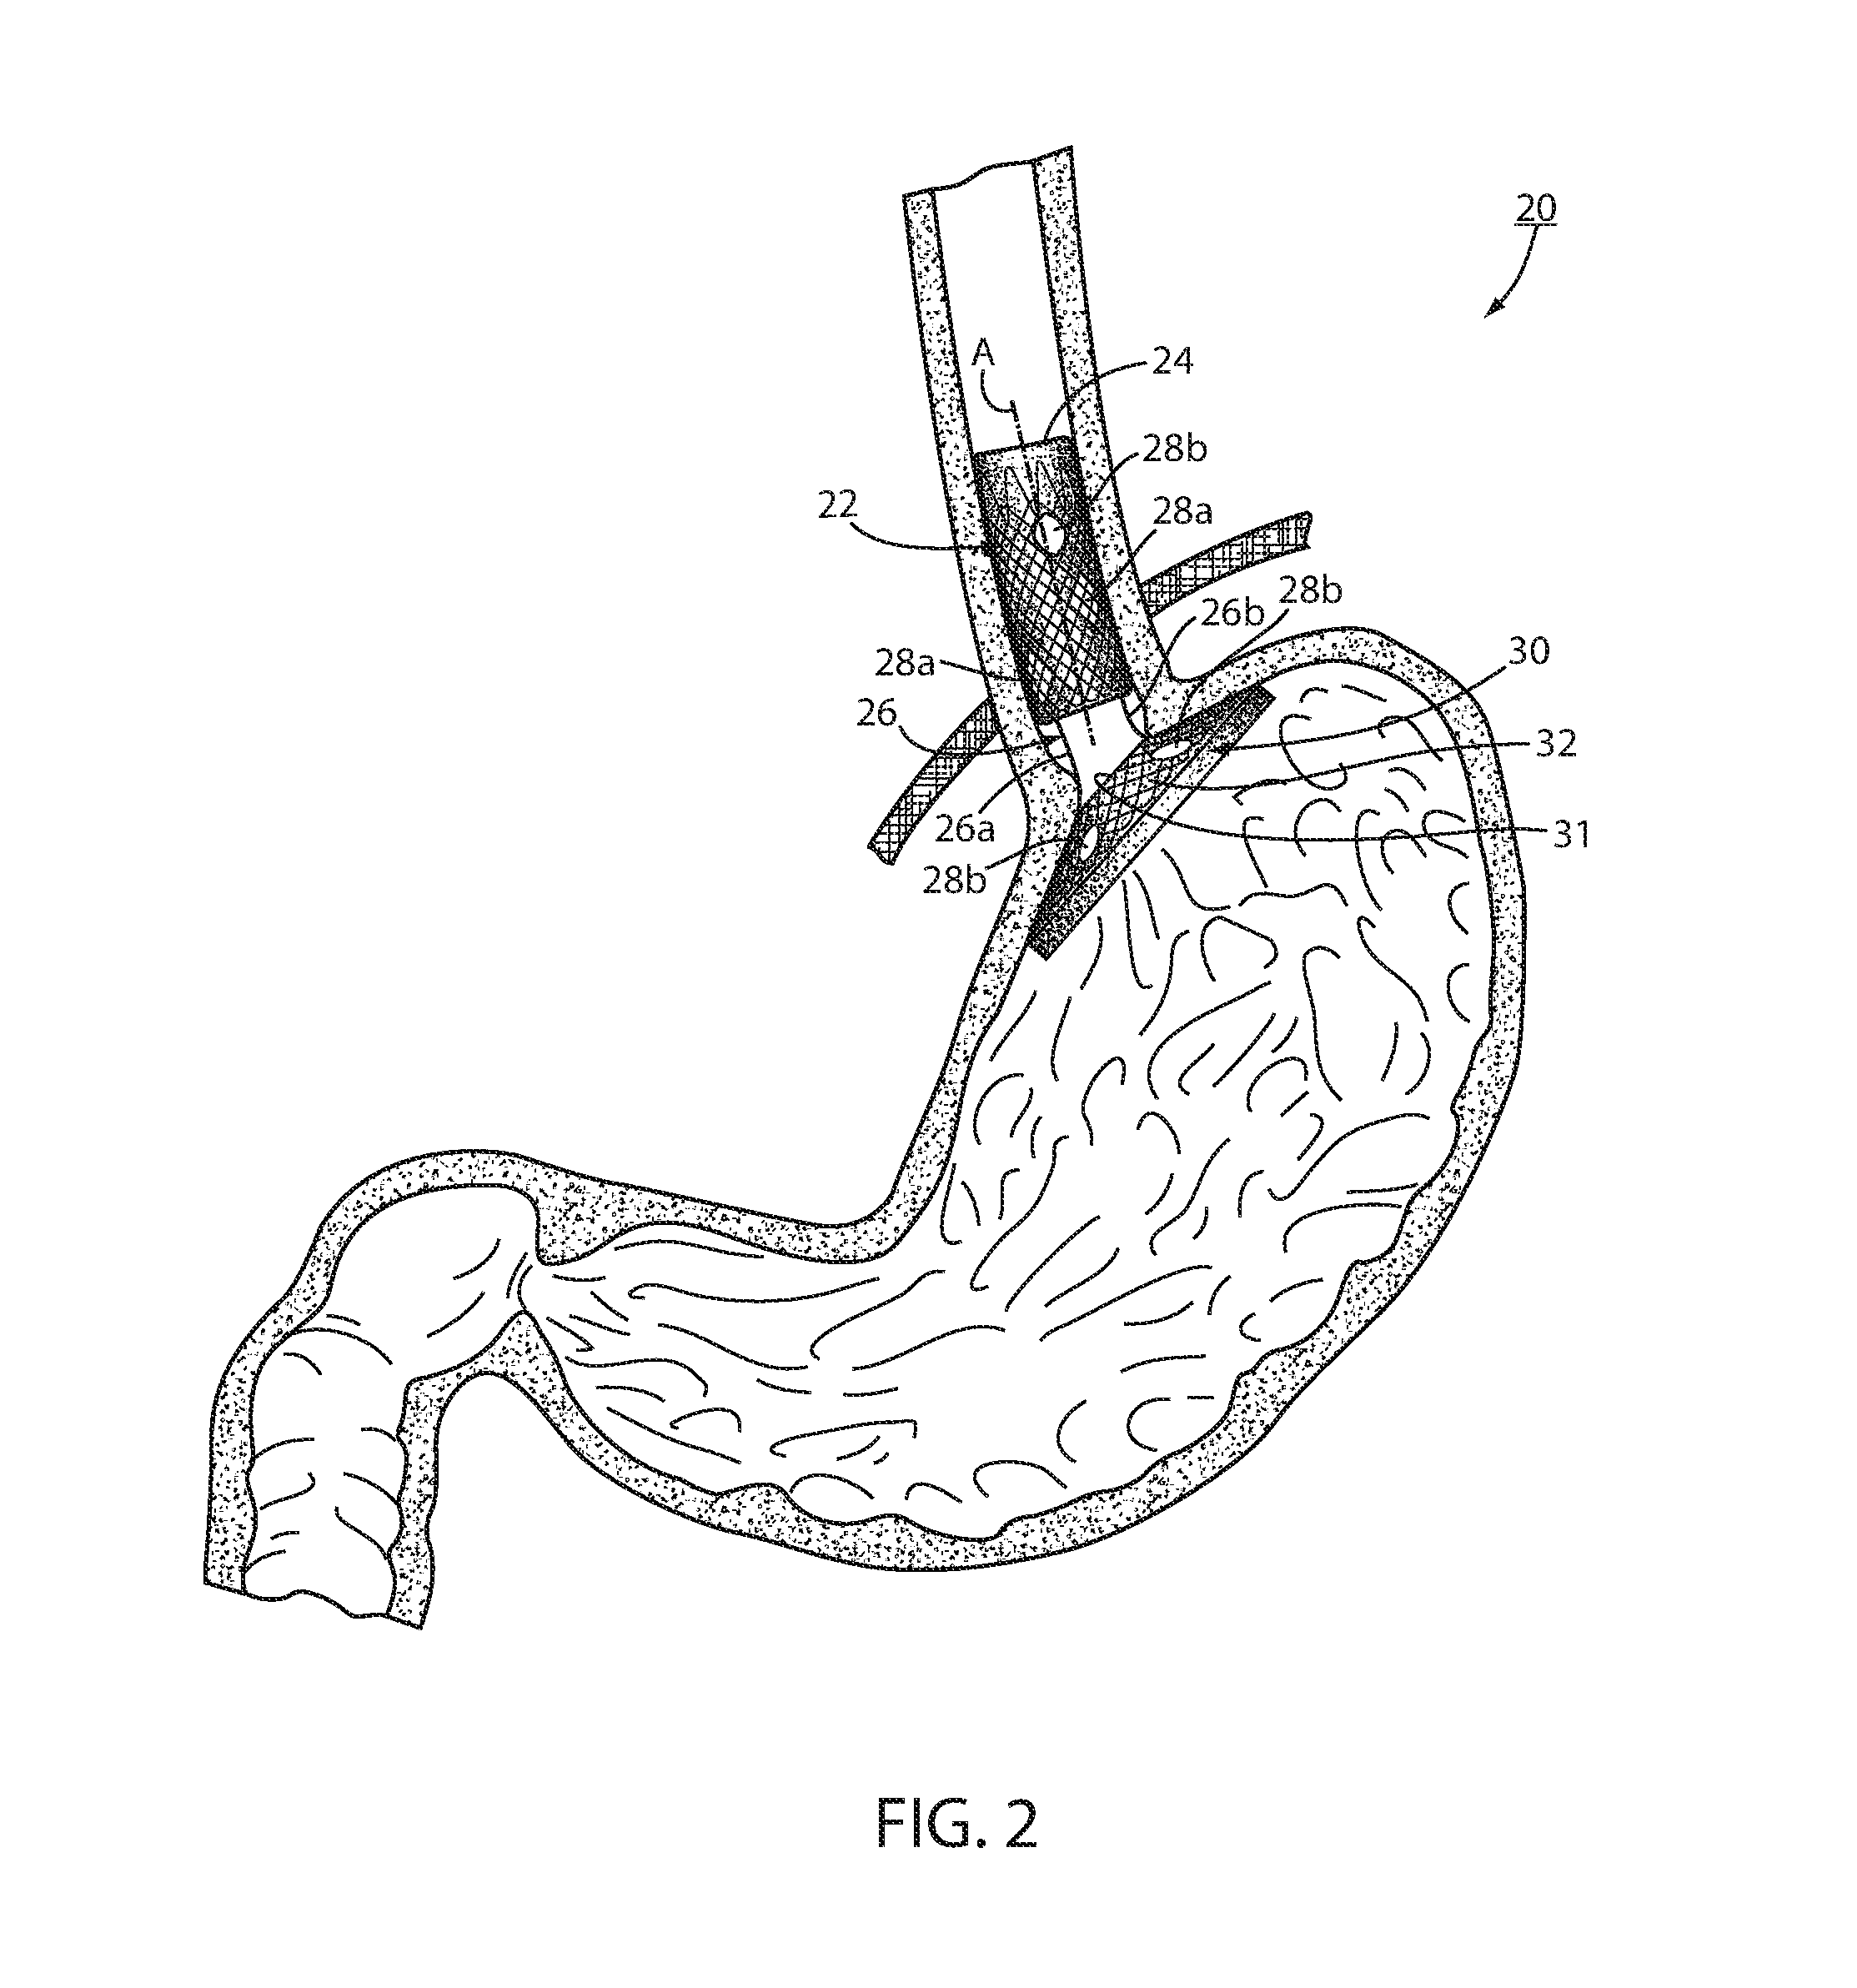 Method and device for treating metabolic disease